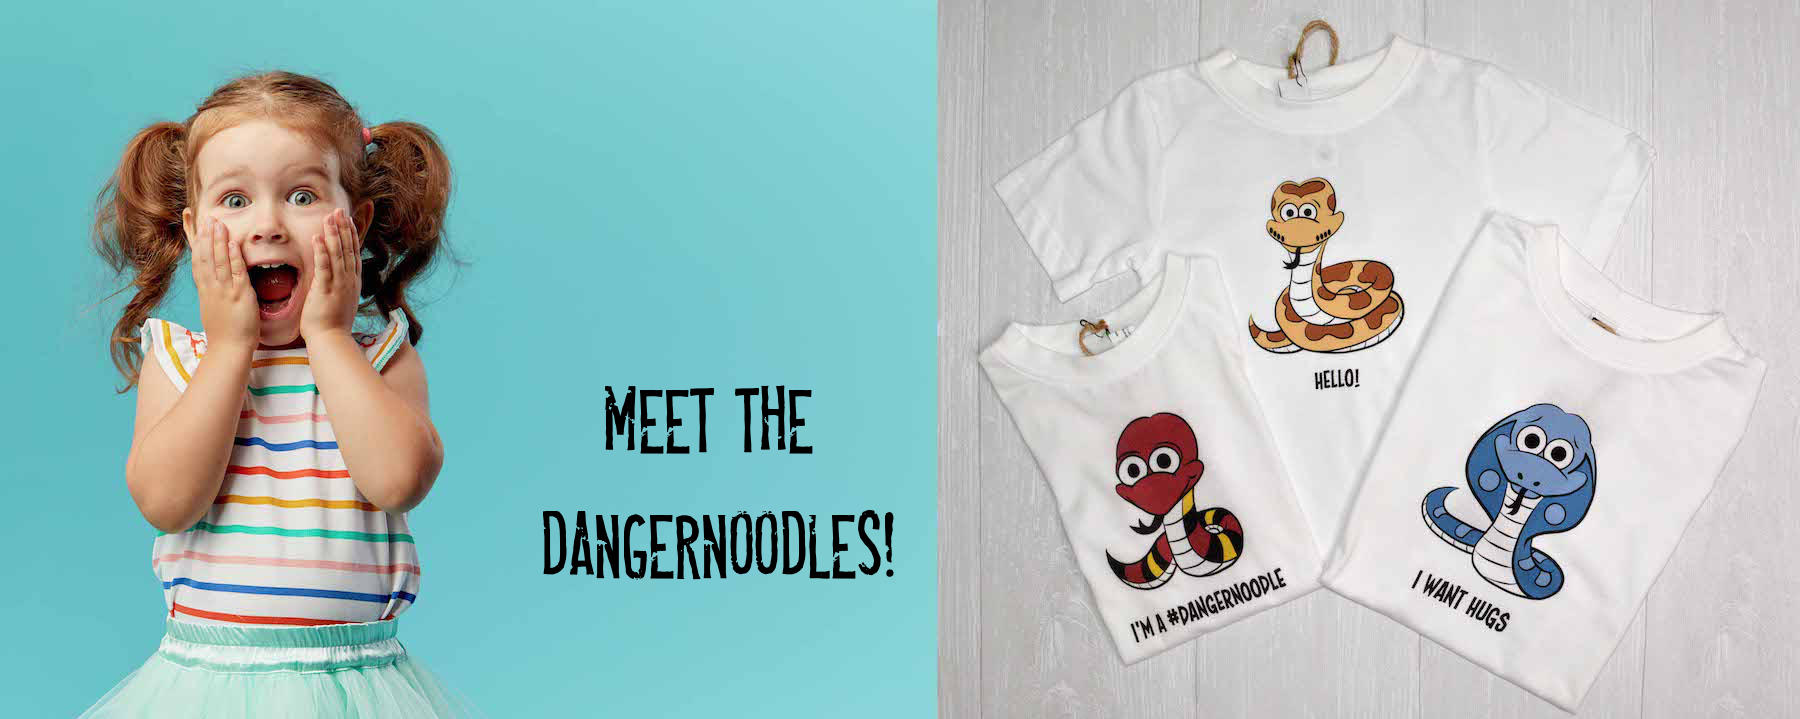 Meet the Dangernoodles! A young girl shrieks in delight. There are three toddler shirts. One has a cute king snake saying "I'm a dangernoodle", one with a cute cobra saying "I want hugs" and the third is an adorable ball python saying "Hello!" underneath